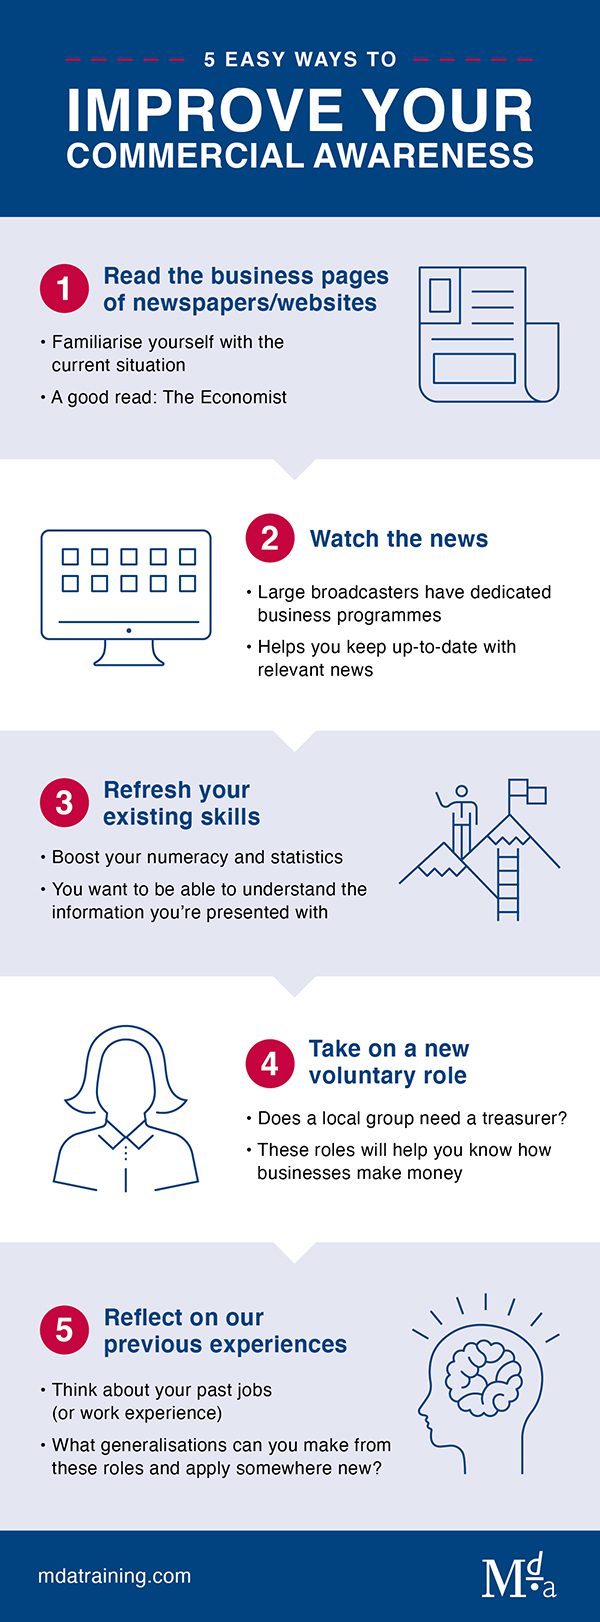 5 easy ways to improve your commercial awareness infographic